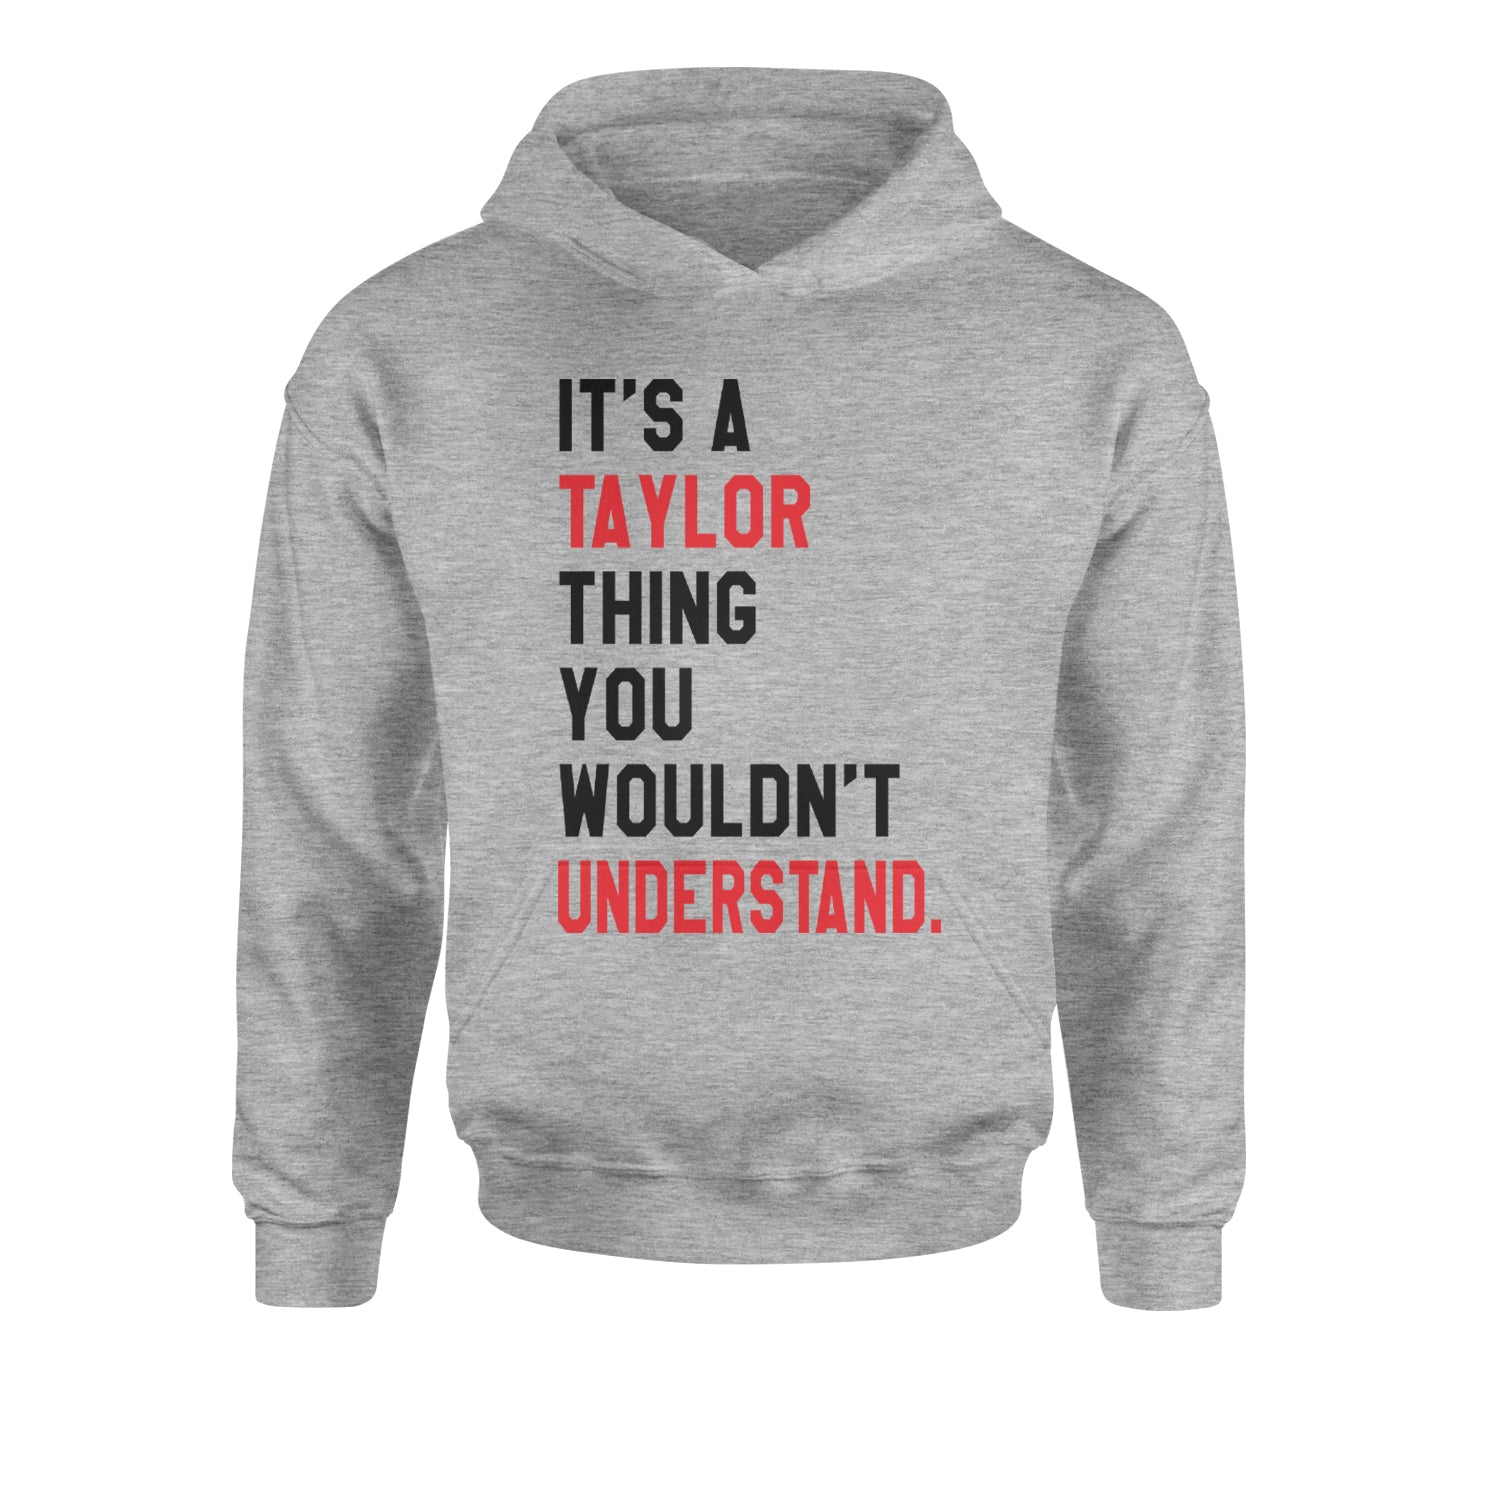 You Wouldn't Understand It's A Taylor Thing TTPD Youth-Sized Hoodie